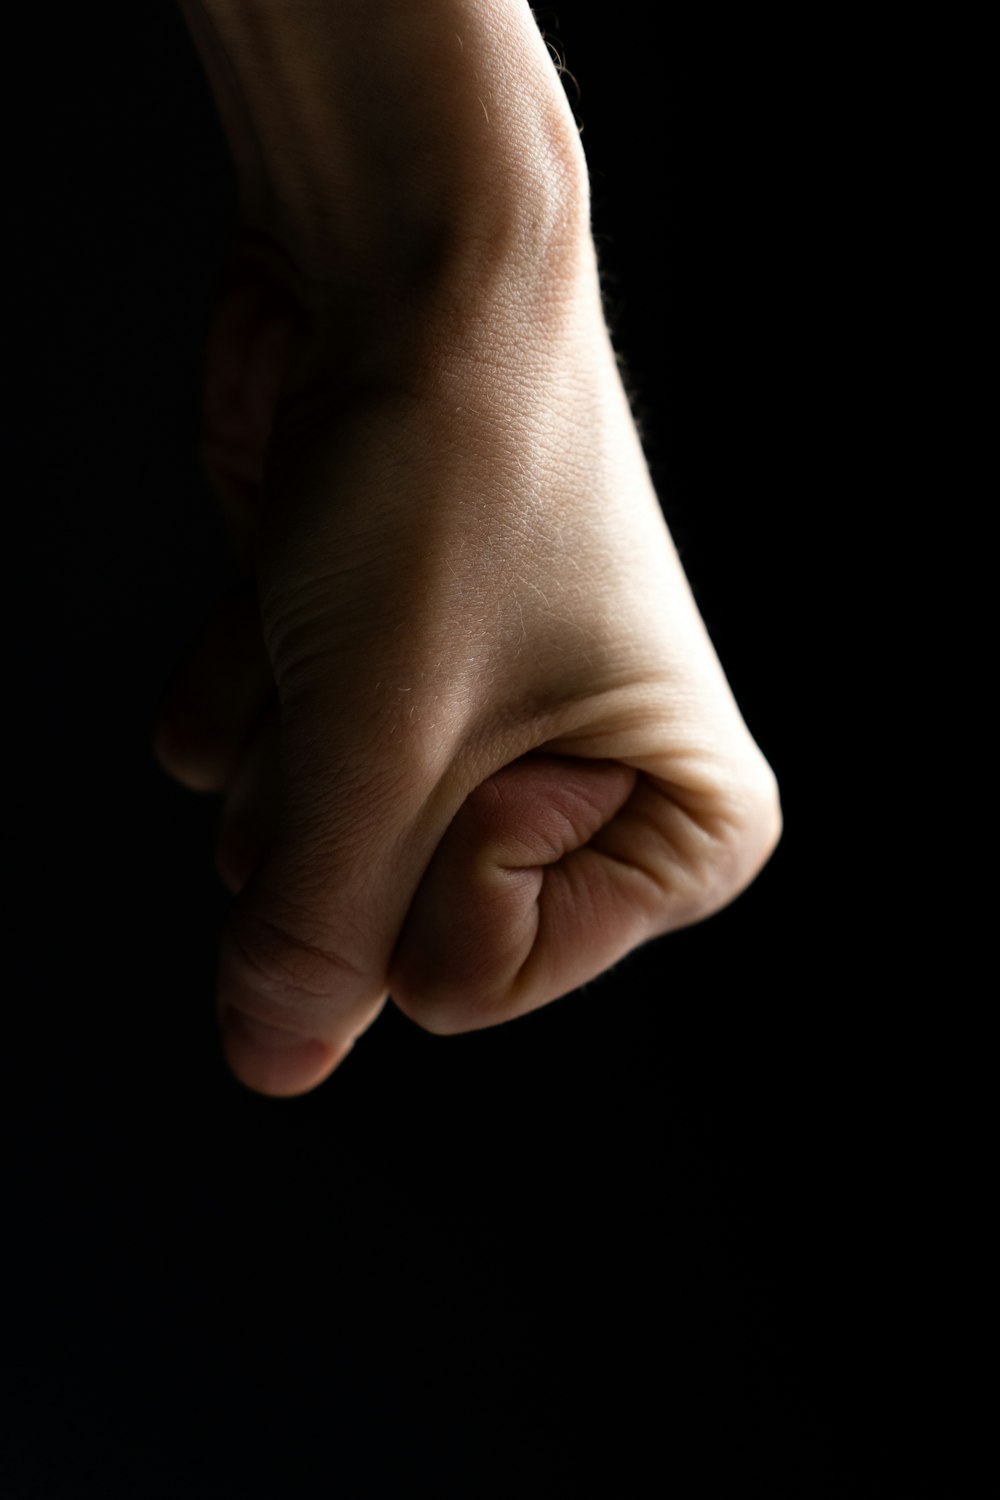 a close up of a person's hand on a black background